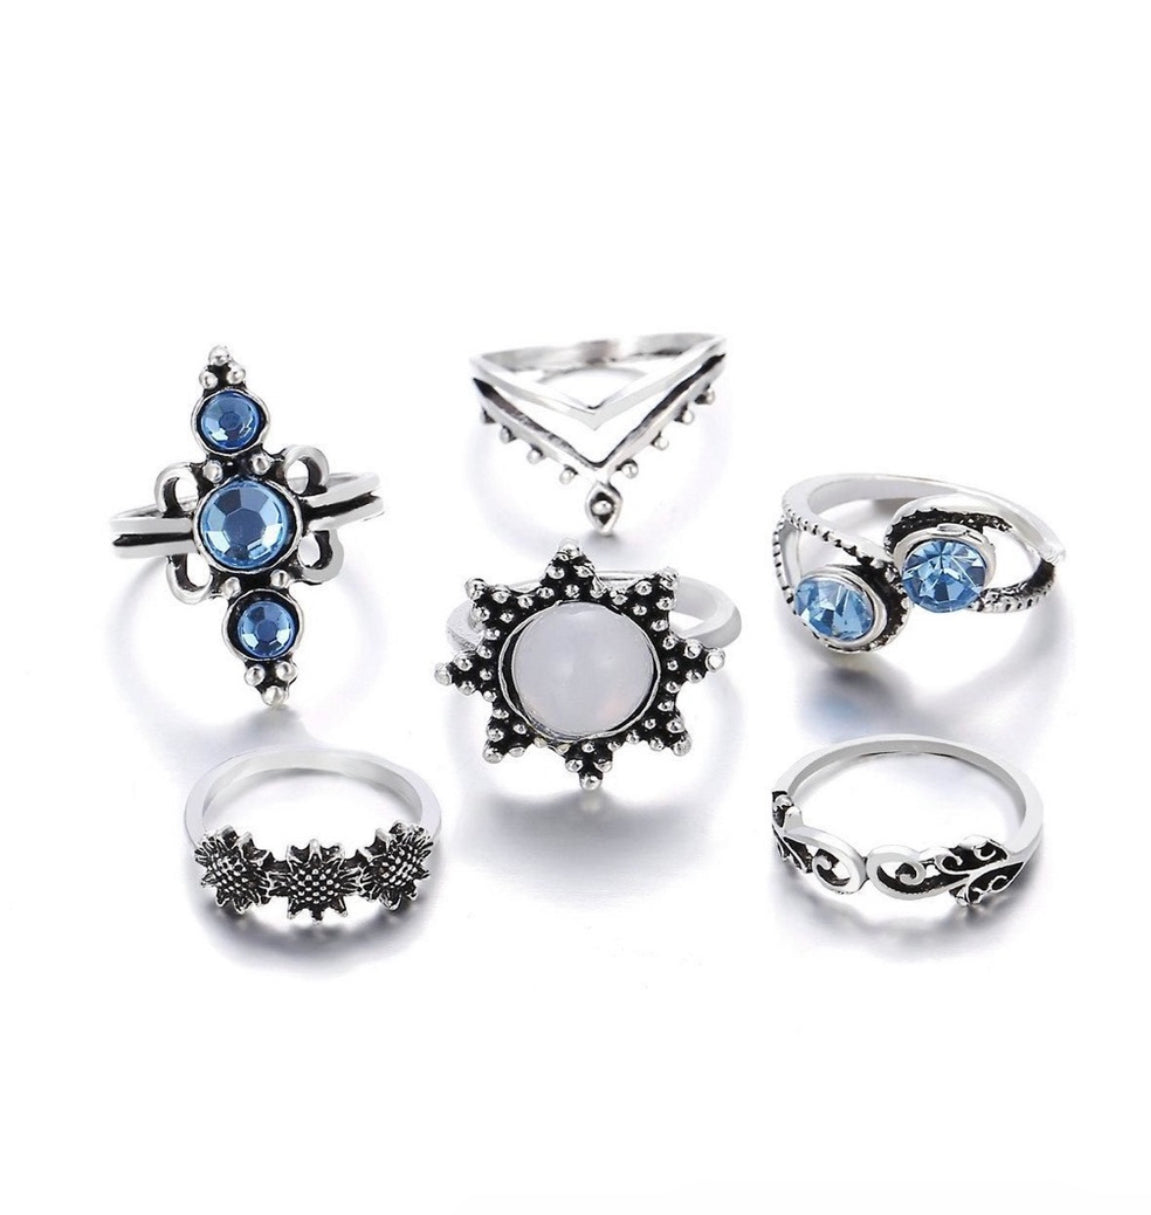 New vintage Sunflower inlay opal rings 6 piece set